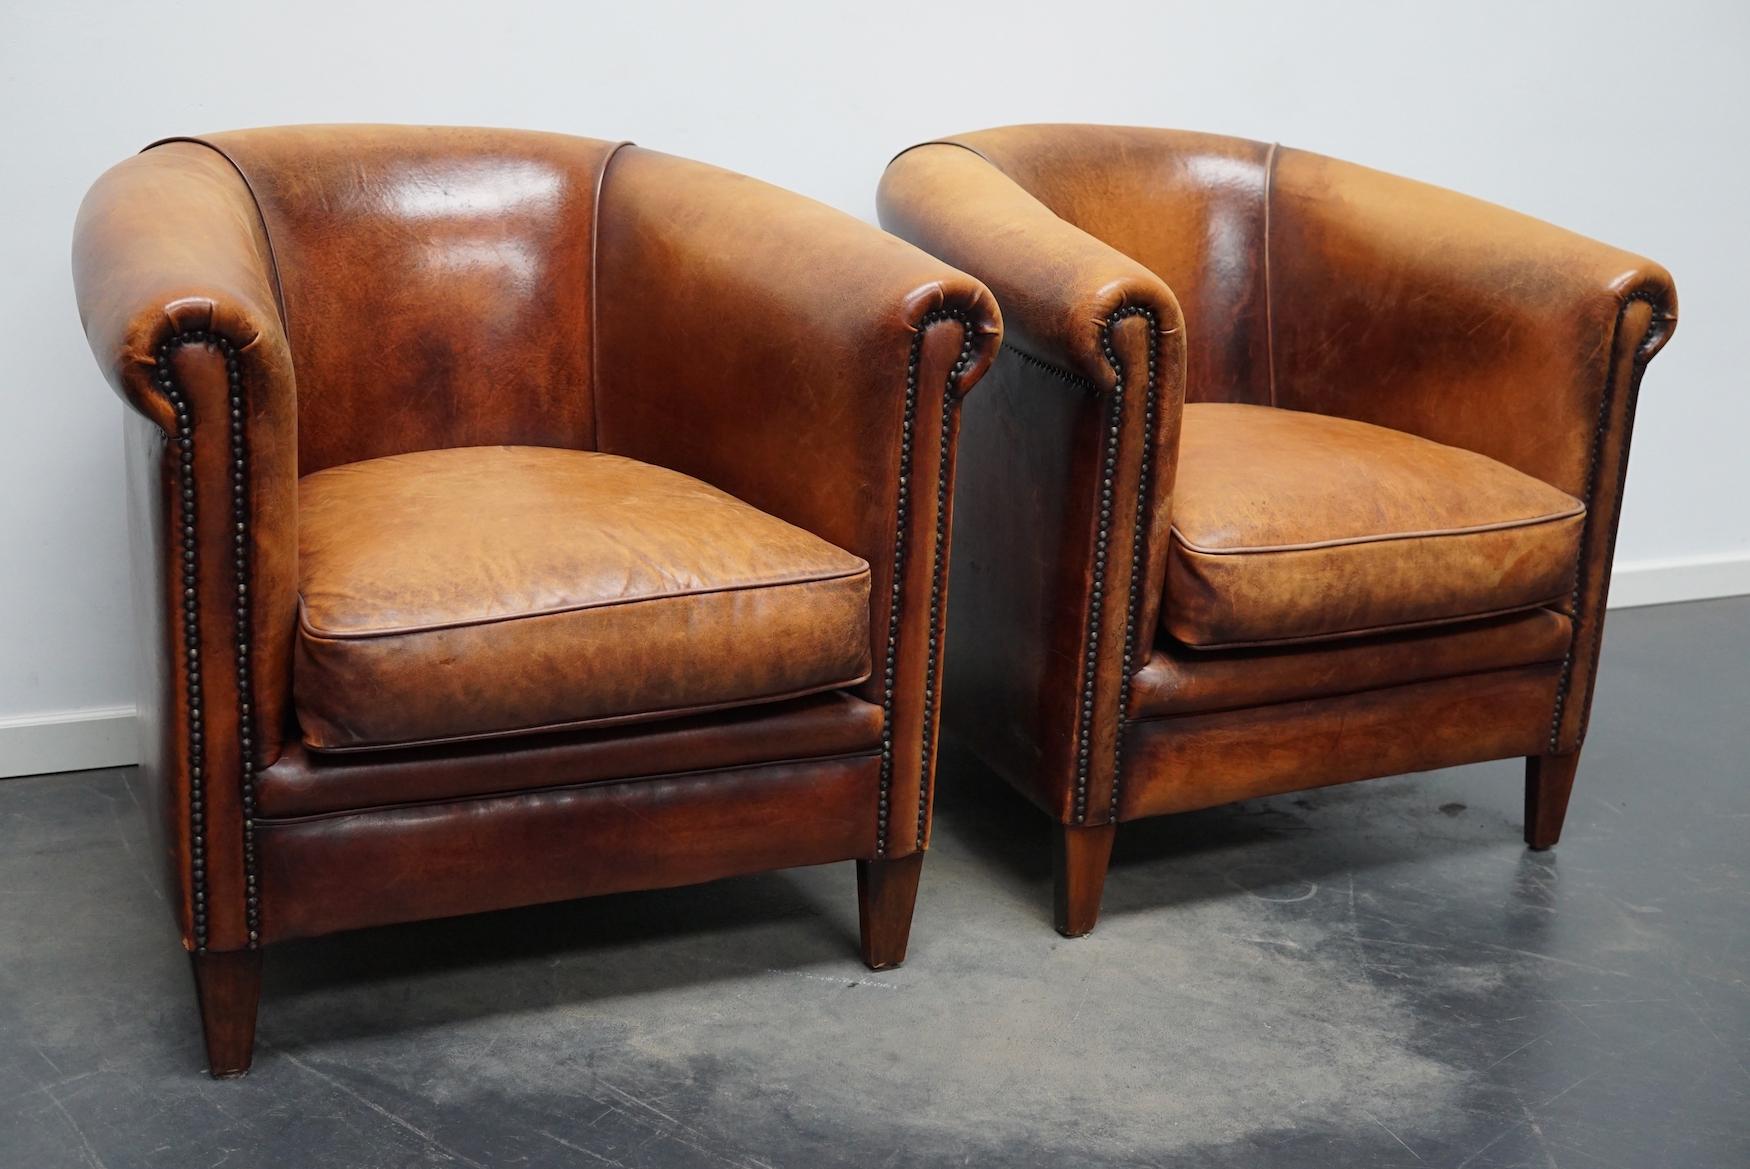 Industrial Vintage Dutch Cognac Colored Leather Club Chair, Set of 2 For Sale